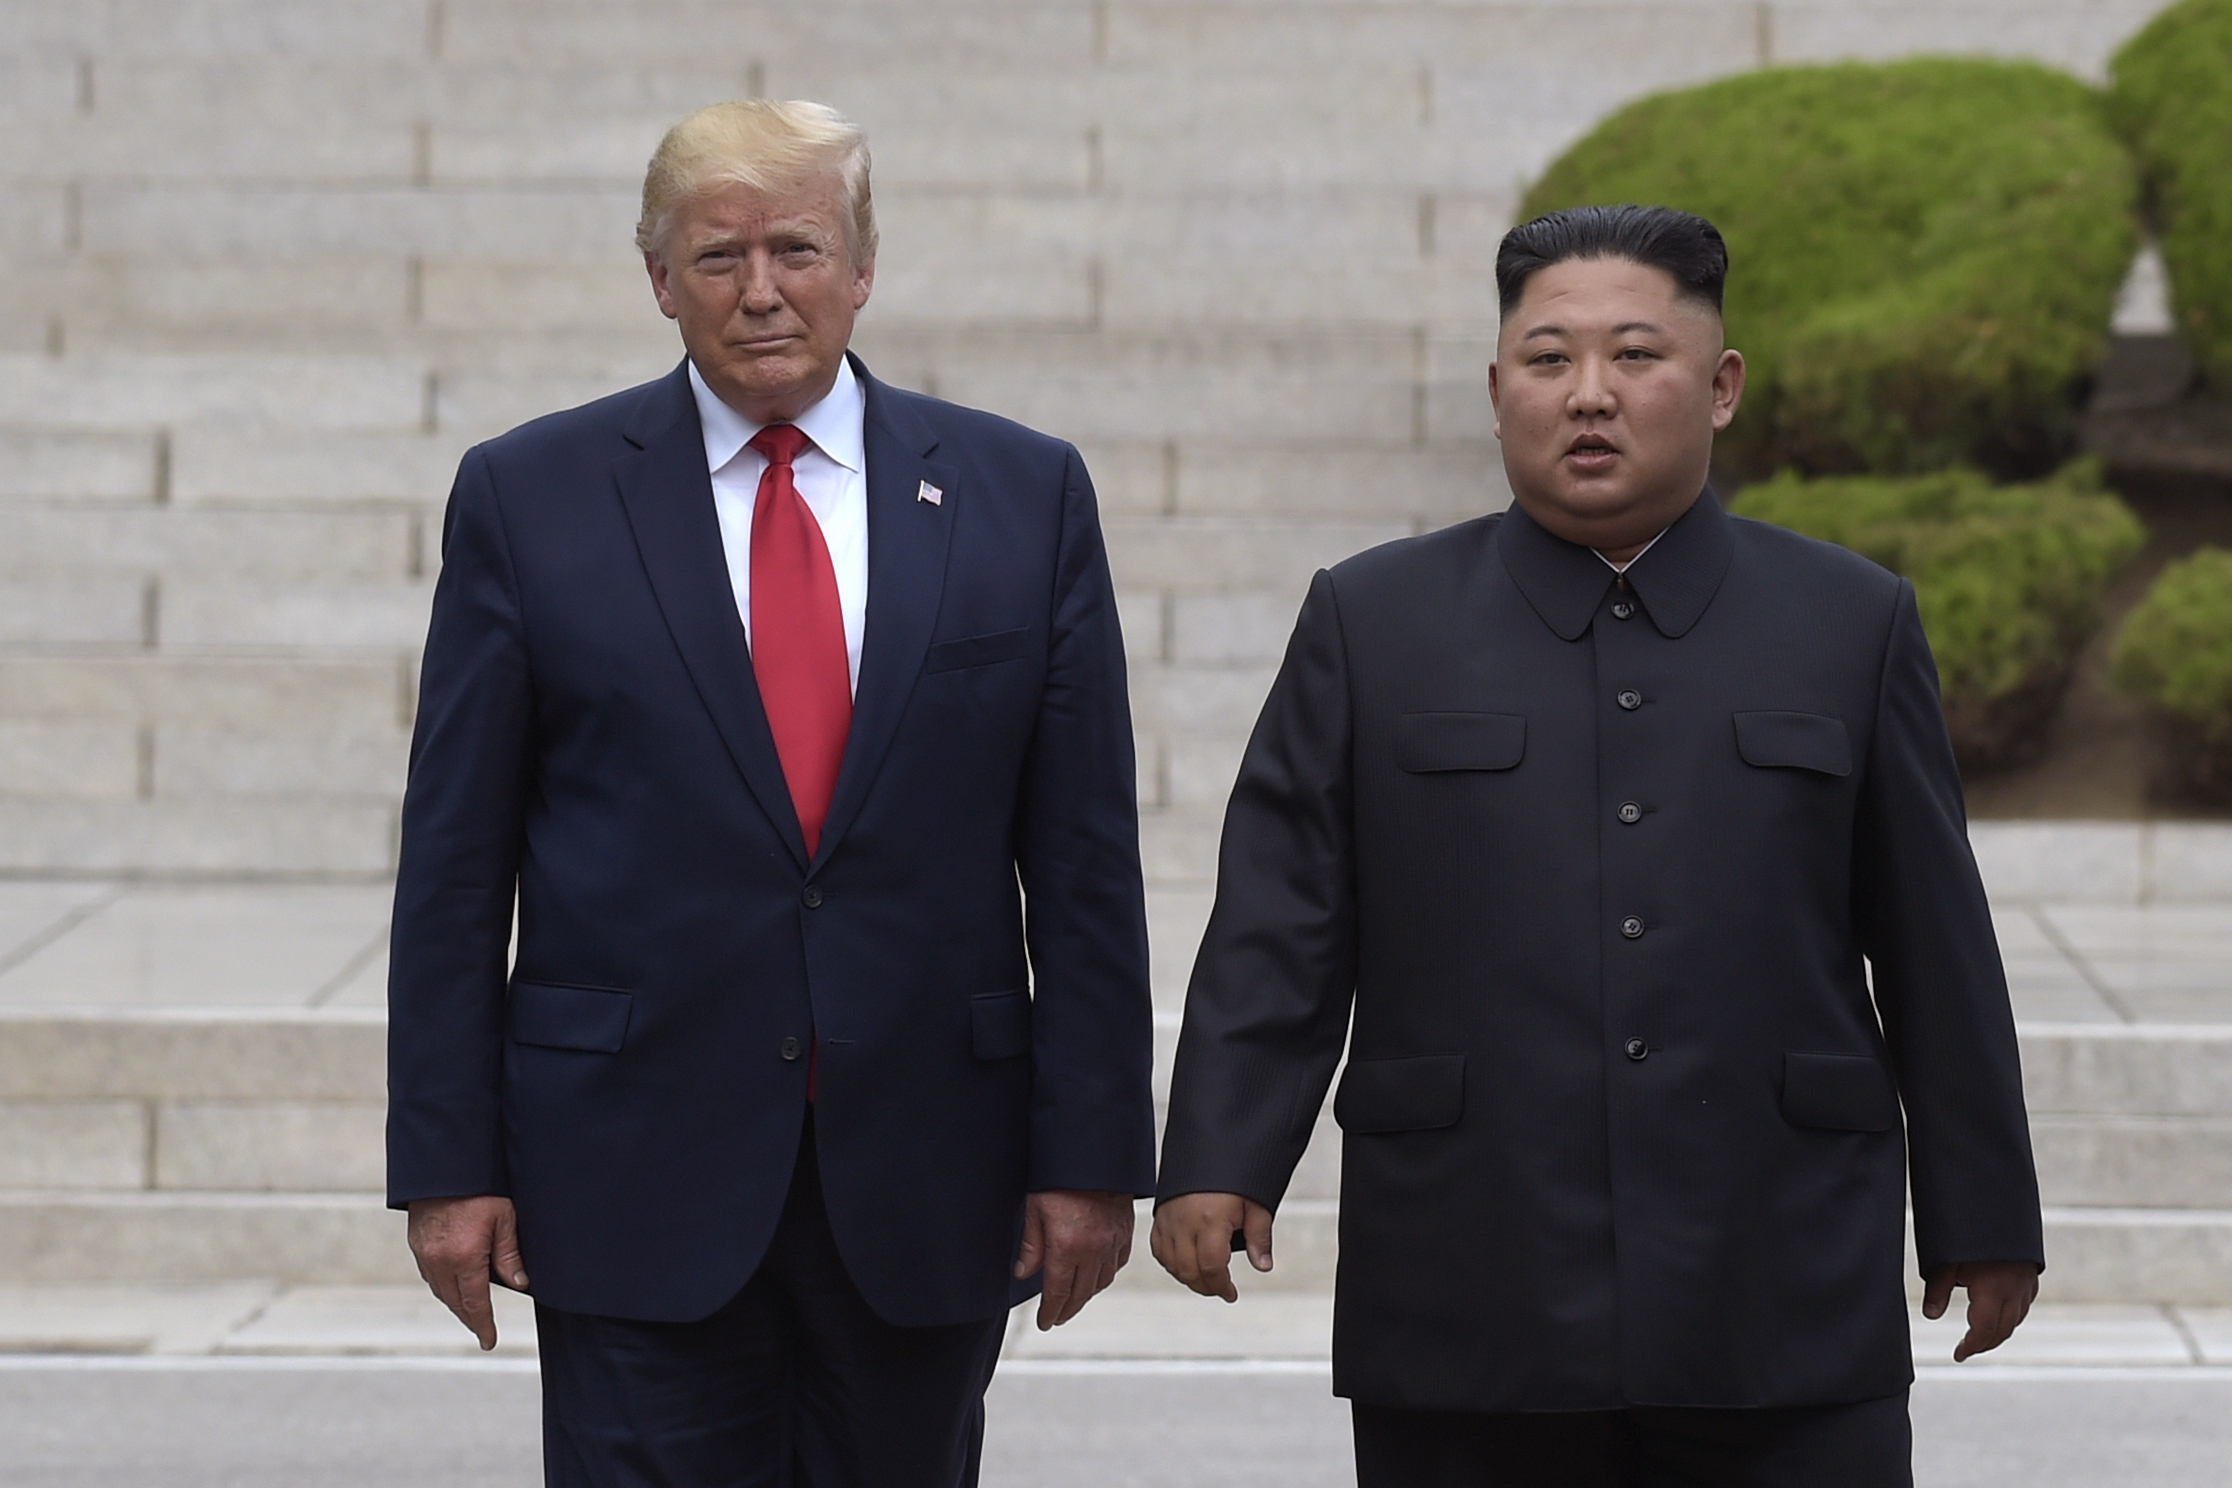 U.S. President Donald Trump, left, meets with North Korean leader Kim Jong Un at the North Korean side of the border at the village of Panmunjom in Demilitarized Zone on June 30, 2019. A senior North Korean diplomat on Tuesday, Oct. 1, 2019, says North Korea and the United States have agreed to resume nuclear negotiations on Oct. 5 following a months-long stalemate over withdrawal of sanctions in exchange for disarmament. (AP Photo/Susan Walsh, File) (Susan Walsh&mdash;AP)